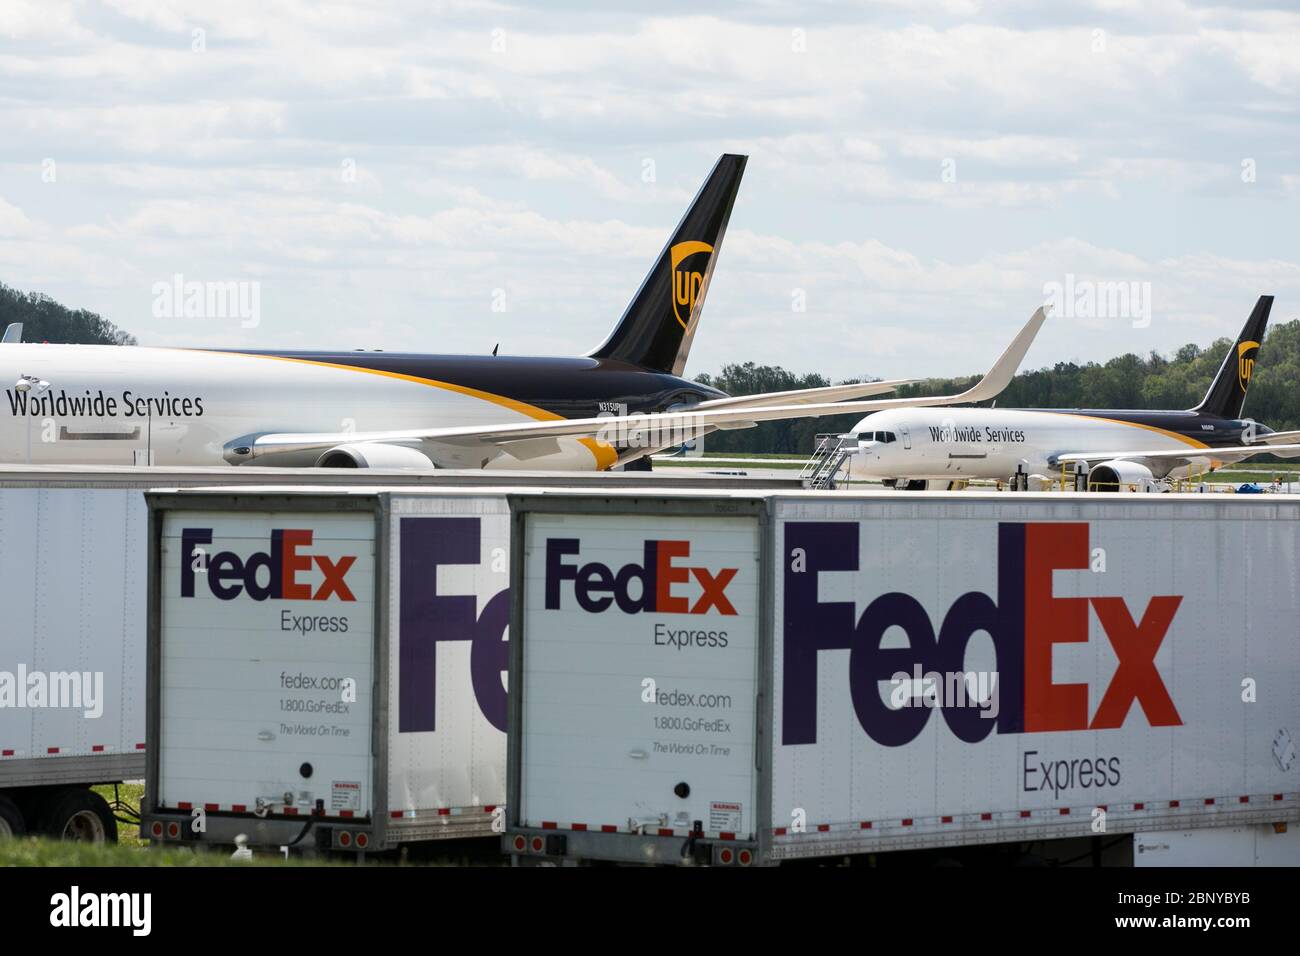 FedEx Express truck trailers are seen in-front of a United Parcel Service UPS Airlines aircraft in Middletown, Pennsylvania on May 4, 2020. Stock Photo